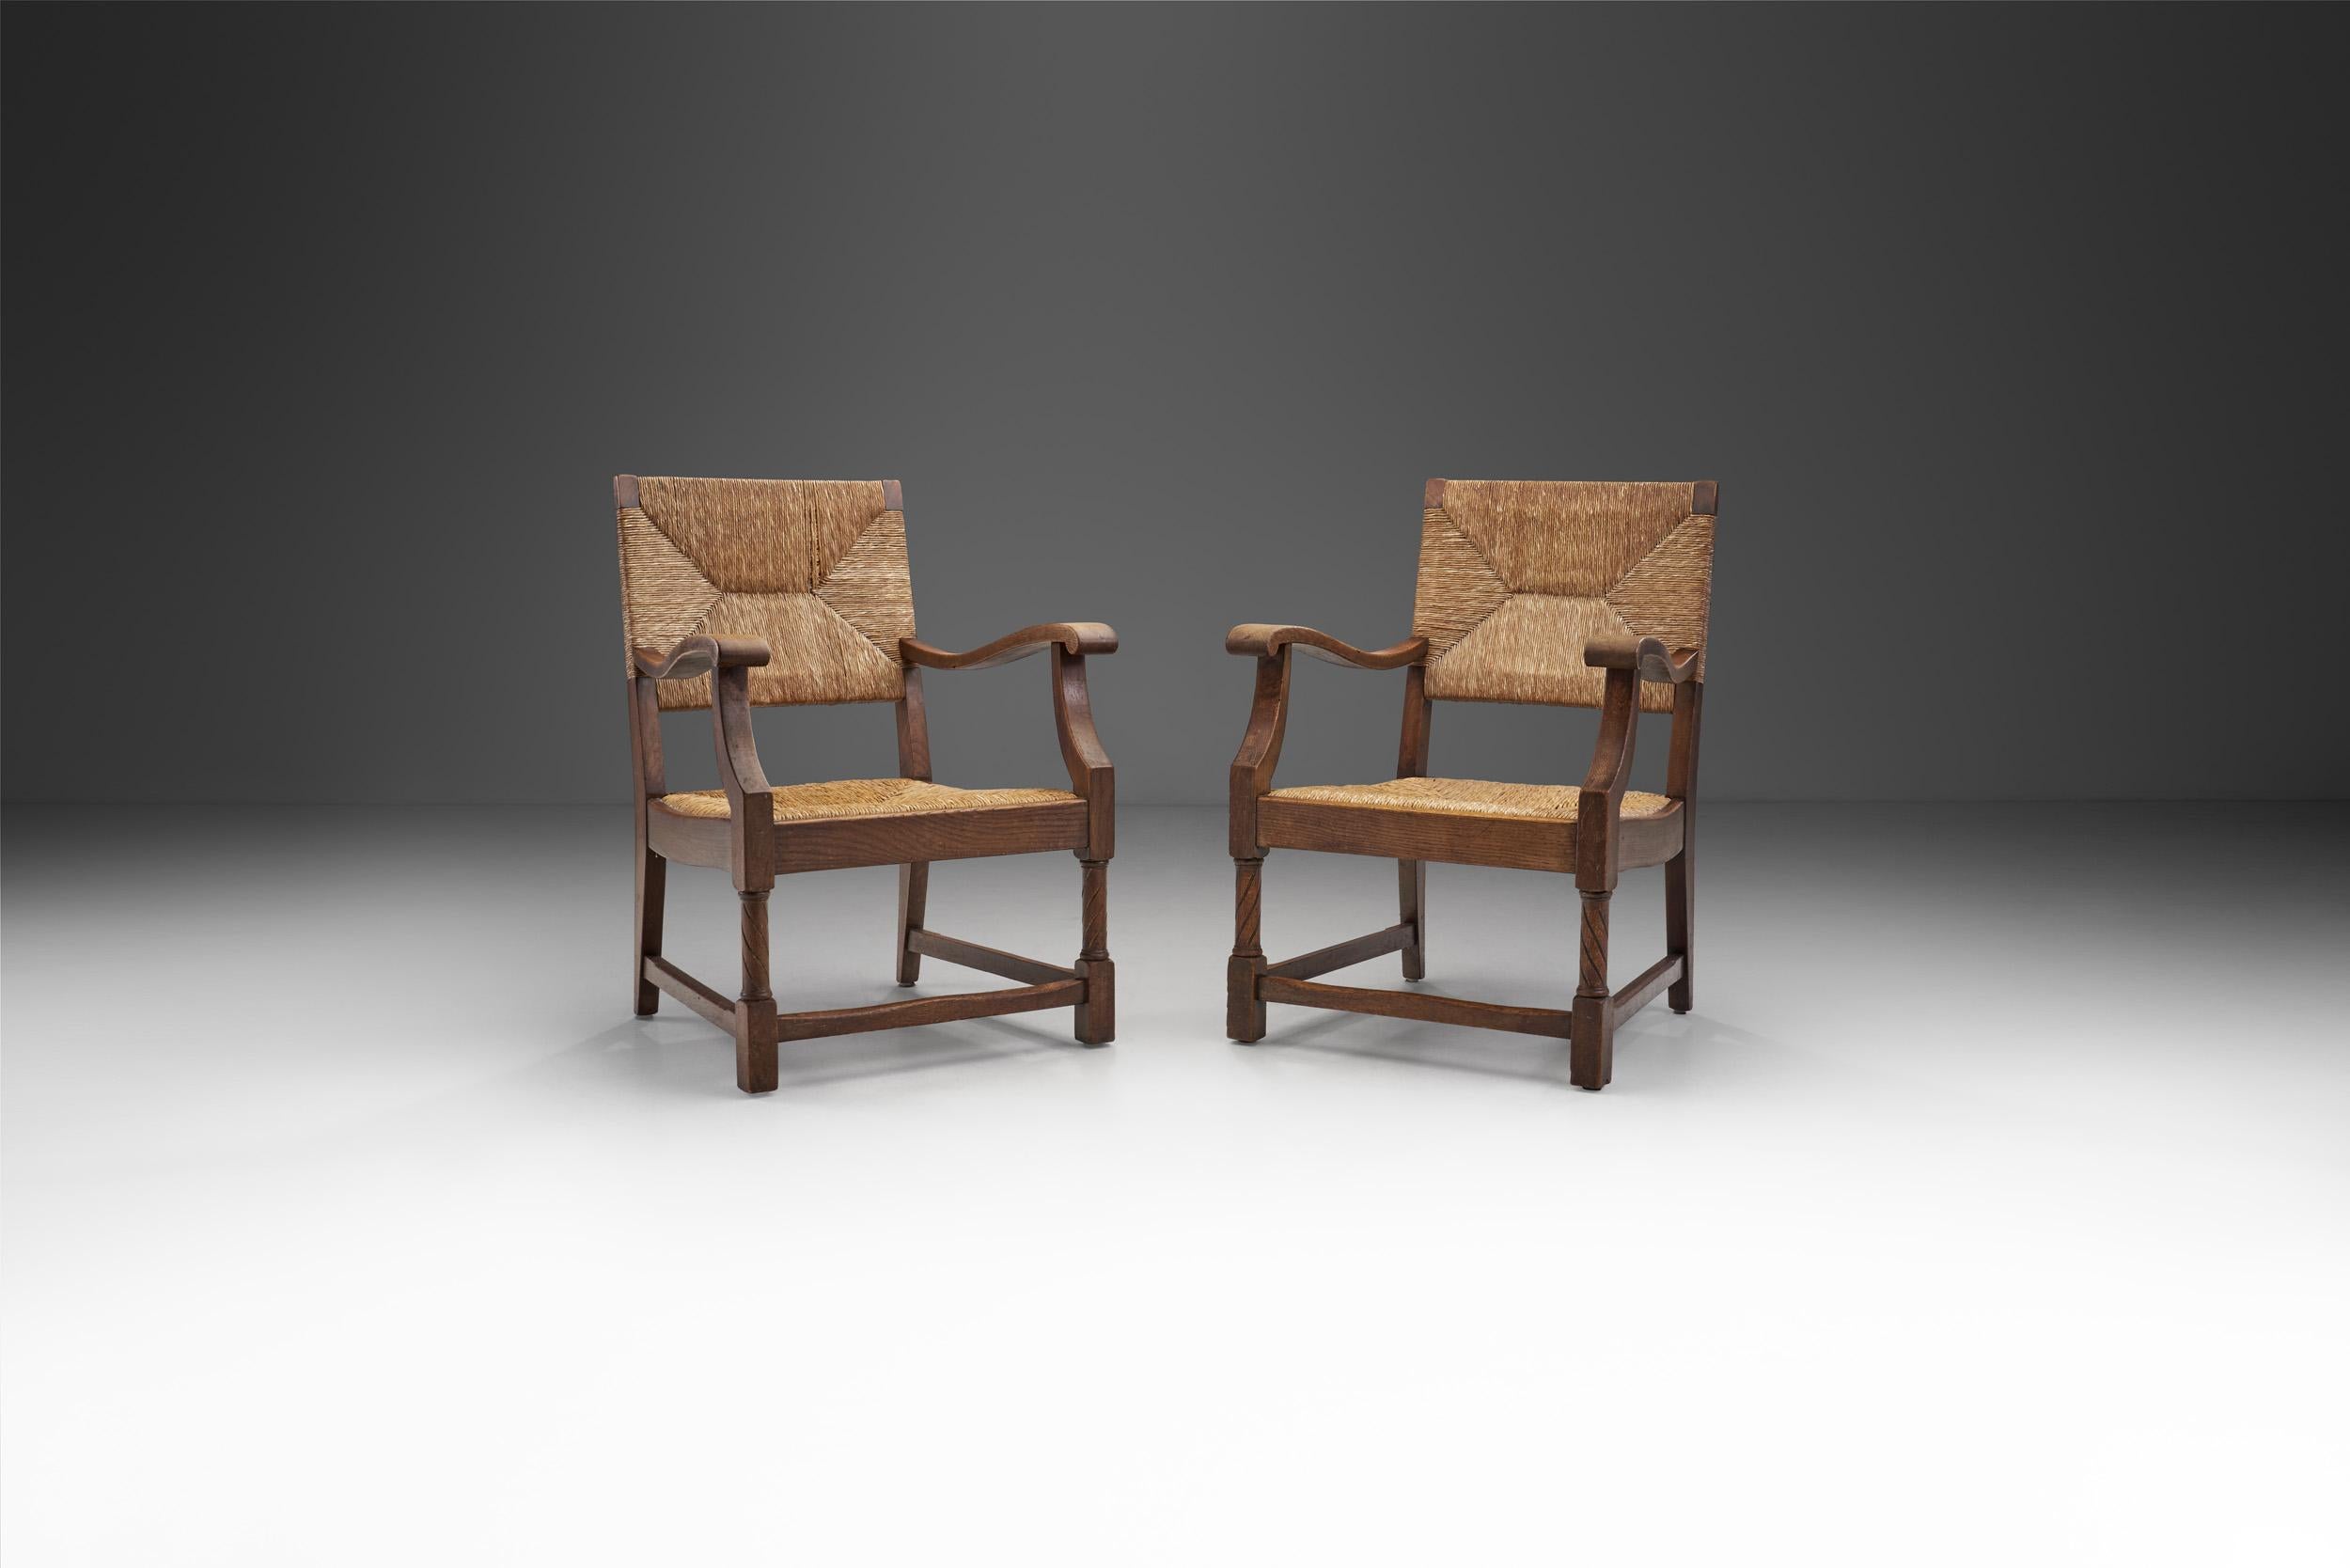 This pair of classic armchairs stands as evidence why many French designers looked back to organic forms during the 1970s. While many early 1970s furniture designs took cues from the Art Deco shapes and forms, a more understated style also became